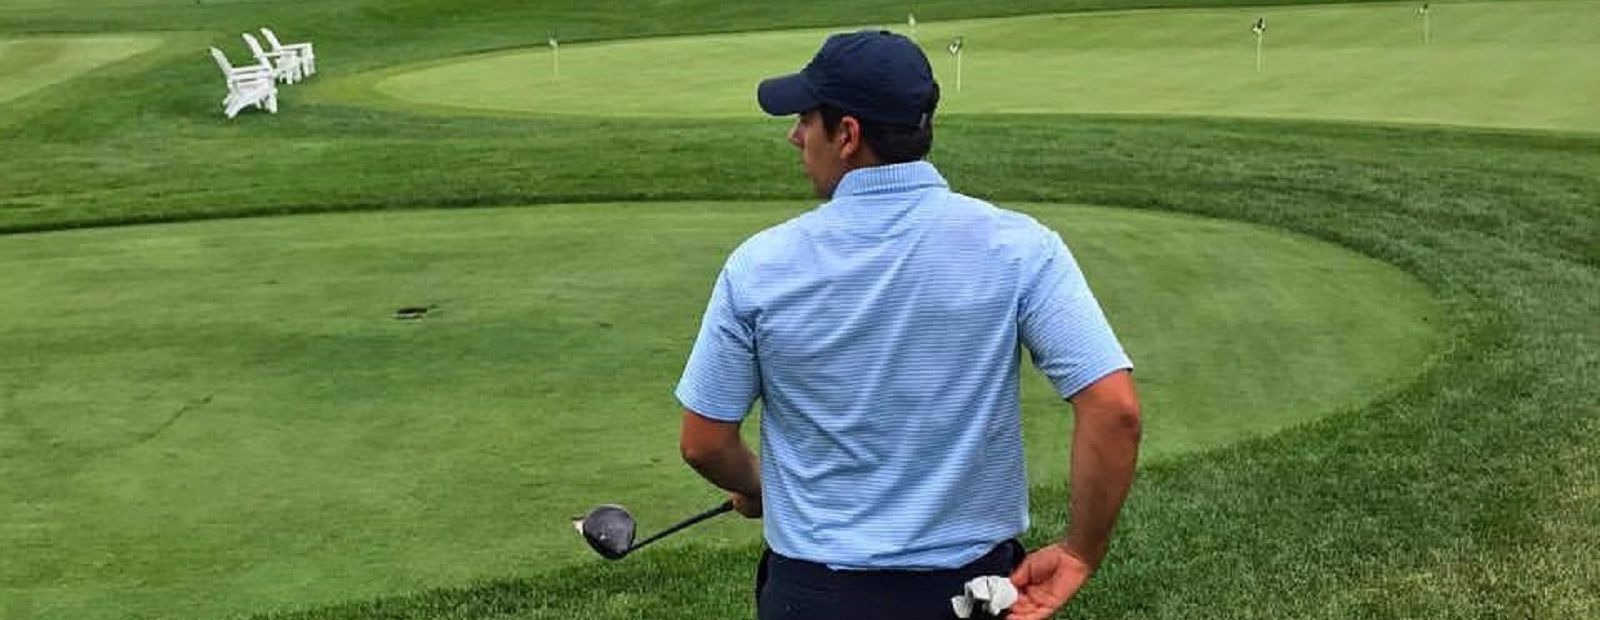 Matthew Fernandez takes a swing at making a round of golf a little easier.